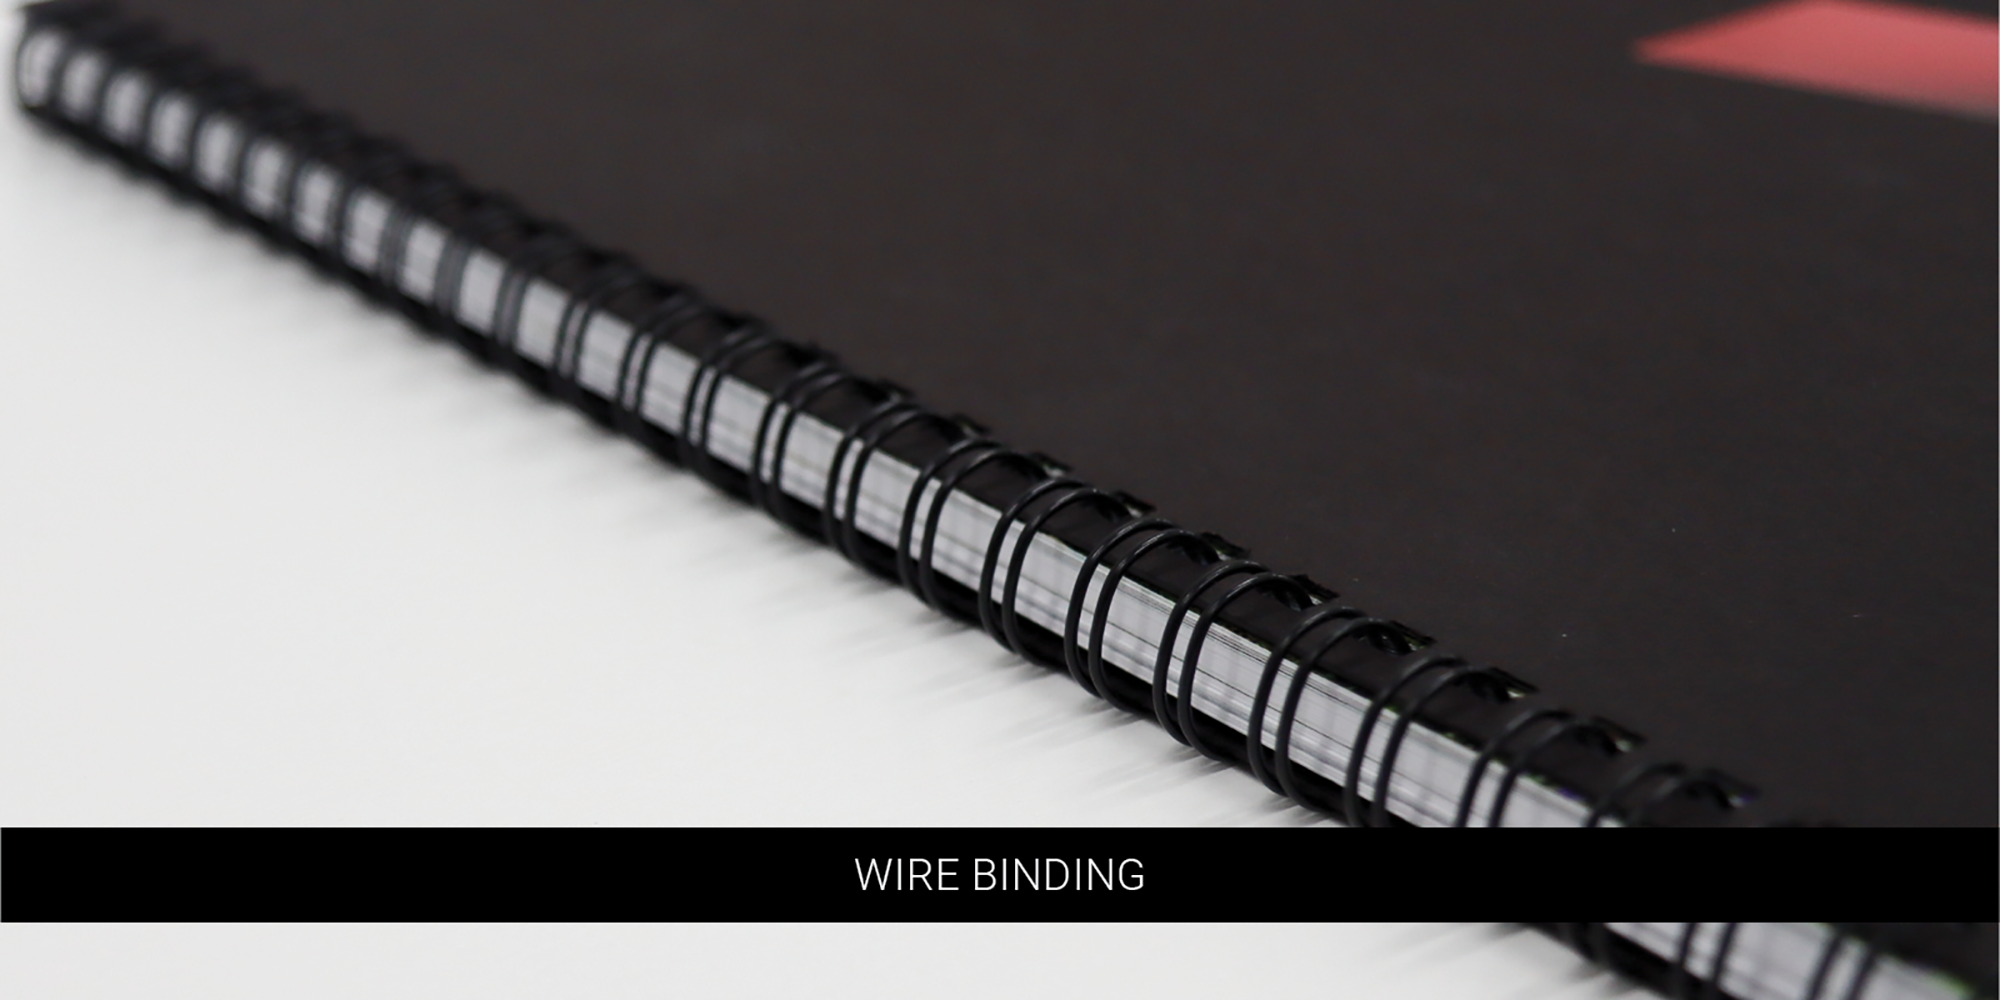 Love the rustic look of these chipboard covers and black wire bindings  you can get both from www.binding101.com